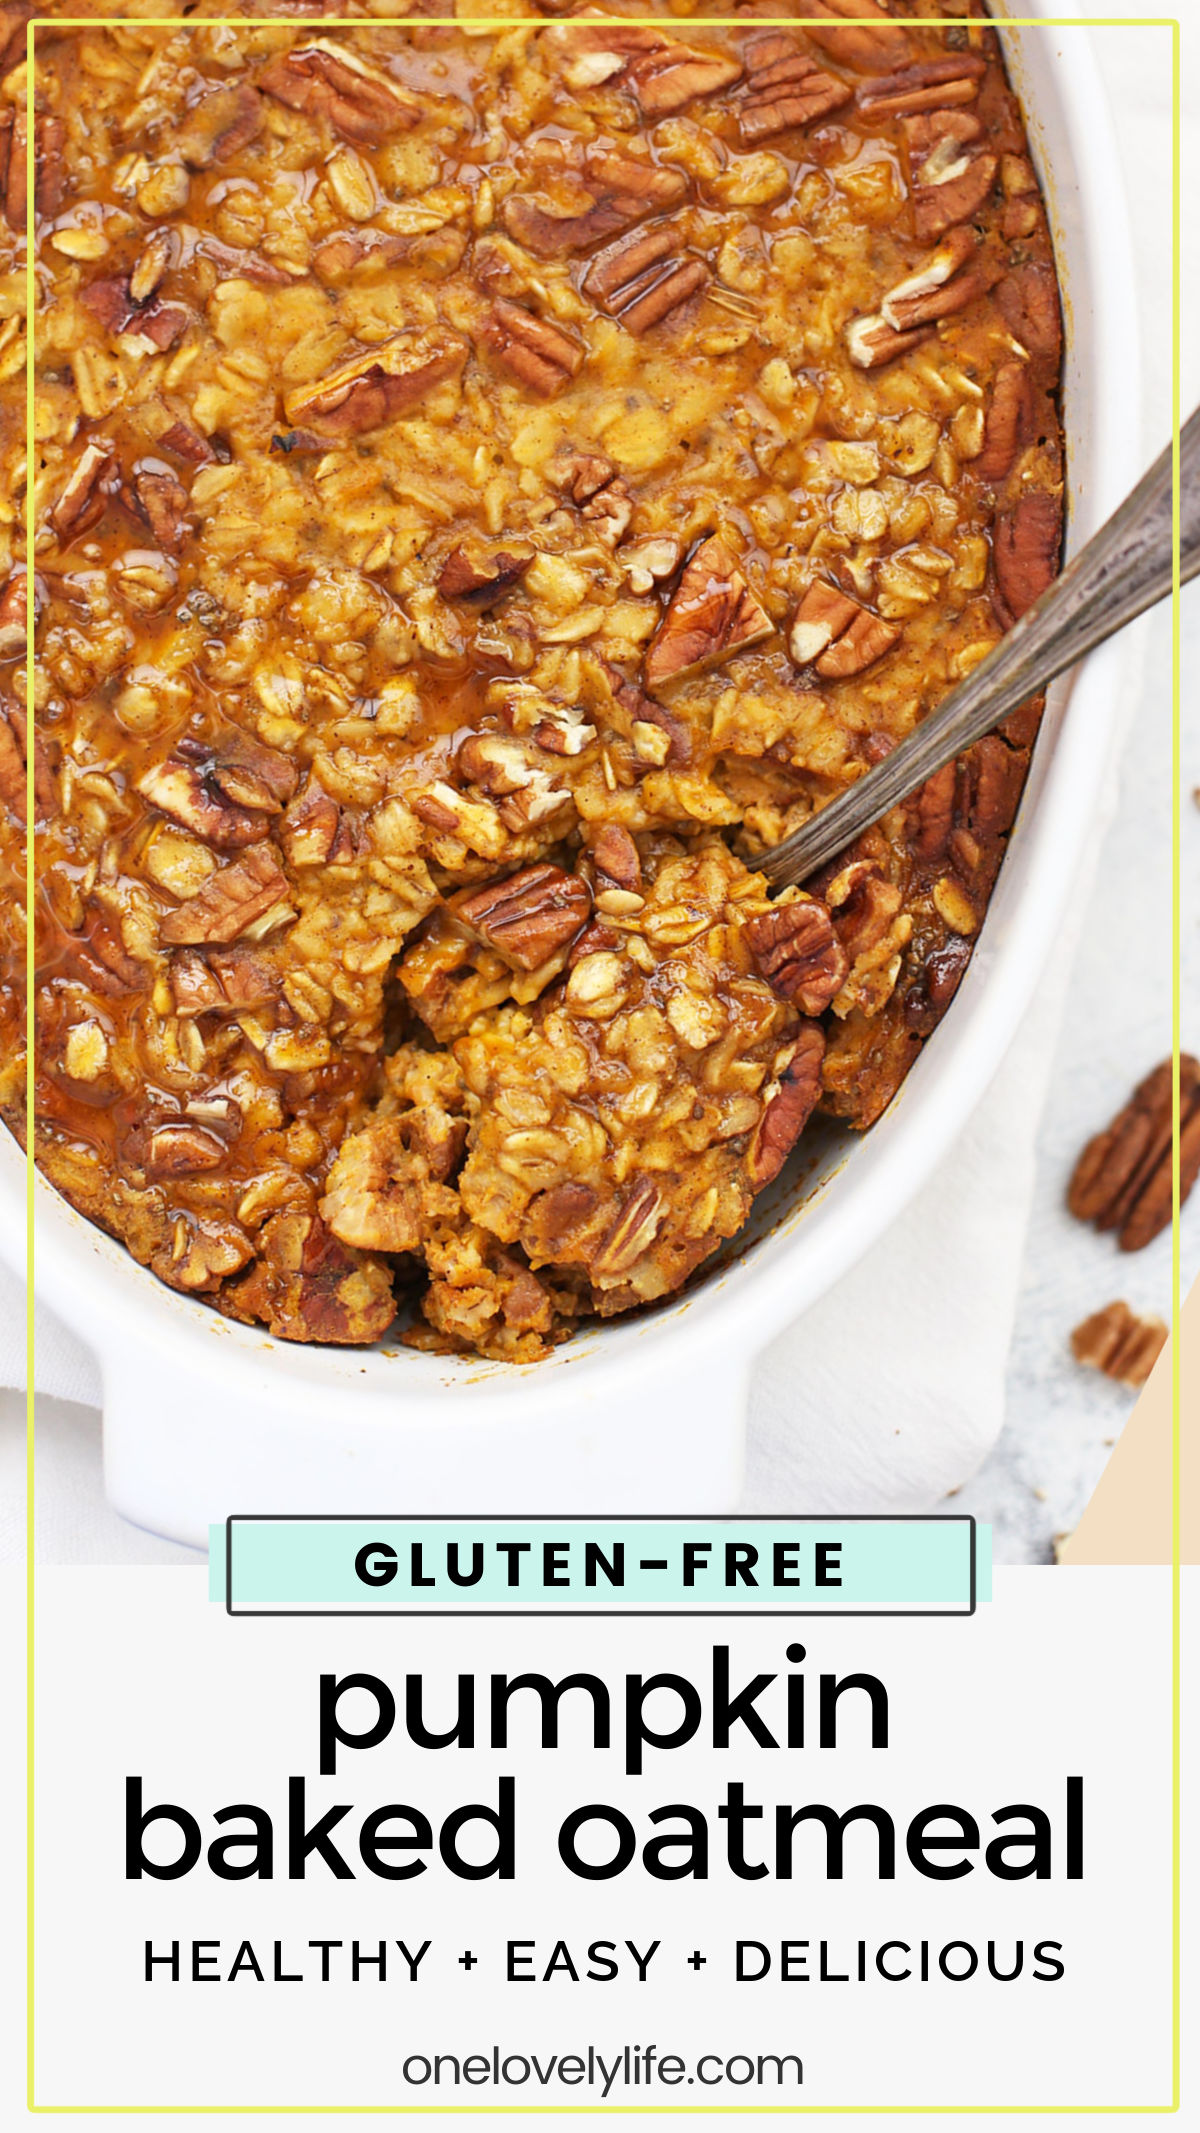 Baked Pumpkin Oatmeal - Studded with pecans and laced with the perfect blend of warm spices, this cozy pumpkin baked oatmeal recipe hits all the right notes! (Gluten free, vegan-friendly) // Pumpkin Oatmeal Recipe // Fall Breakfast // Healthy Pumpkin Recipes // Gluten-Free Breakfast // Healthy Breakfast // Vegan Breakfast // Pumpkin Breakfast Recipes // pumpkin oatmeal // baked oatmeal recipes